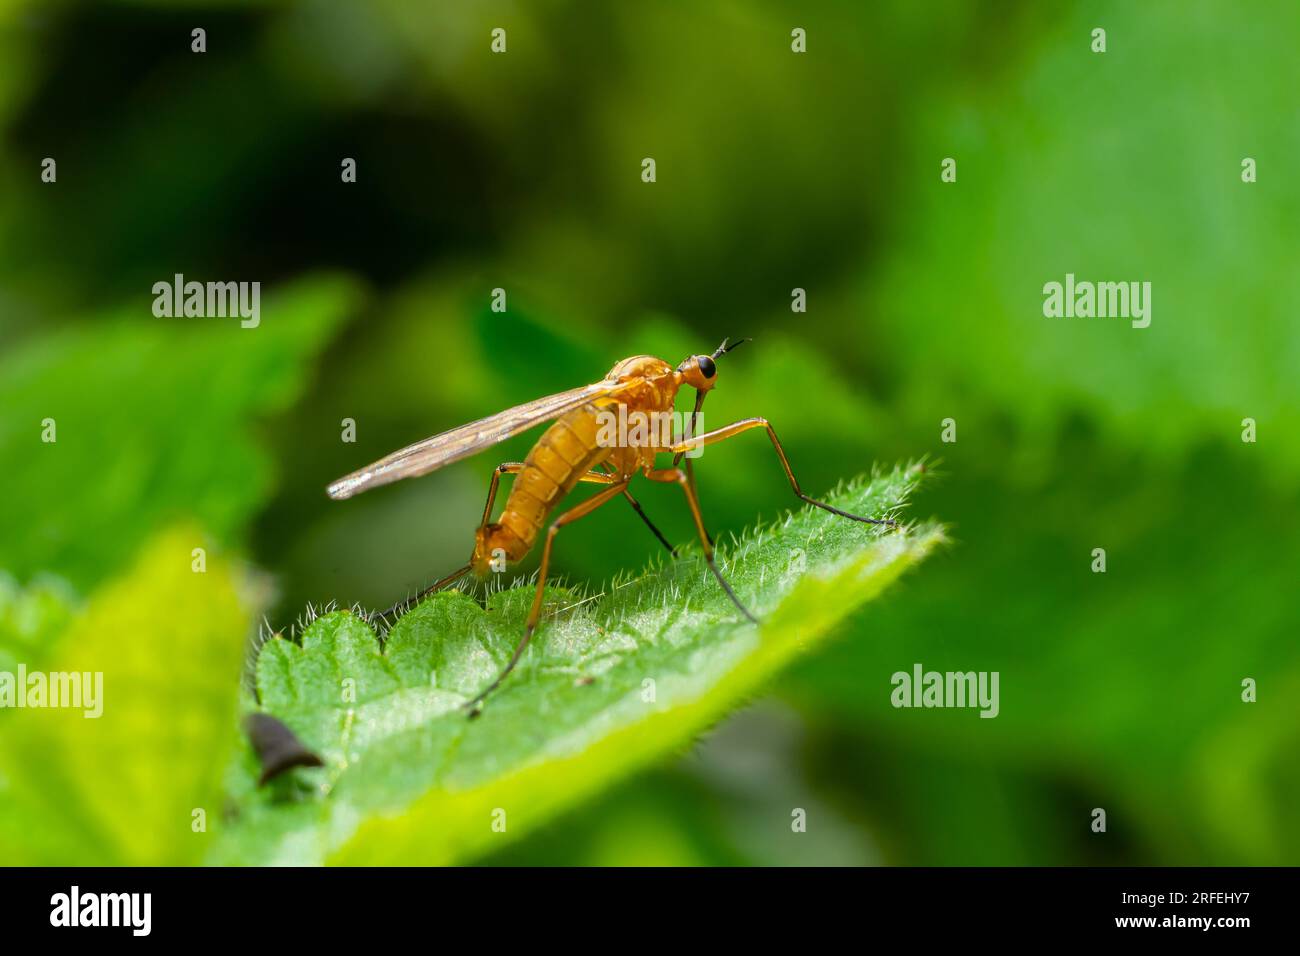 Yellow fly-scorpion on a blade of grass in a natural environment, forest, summer sunlight. Stock Photo